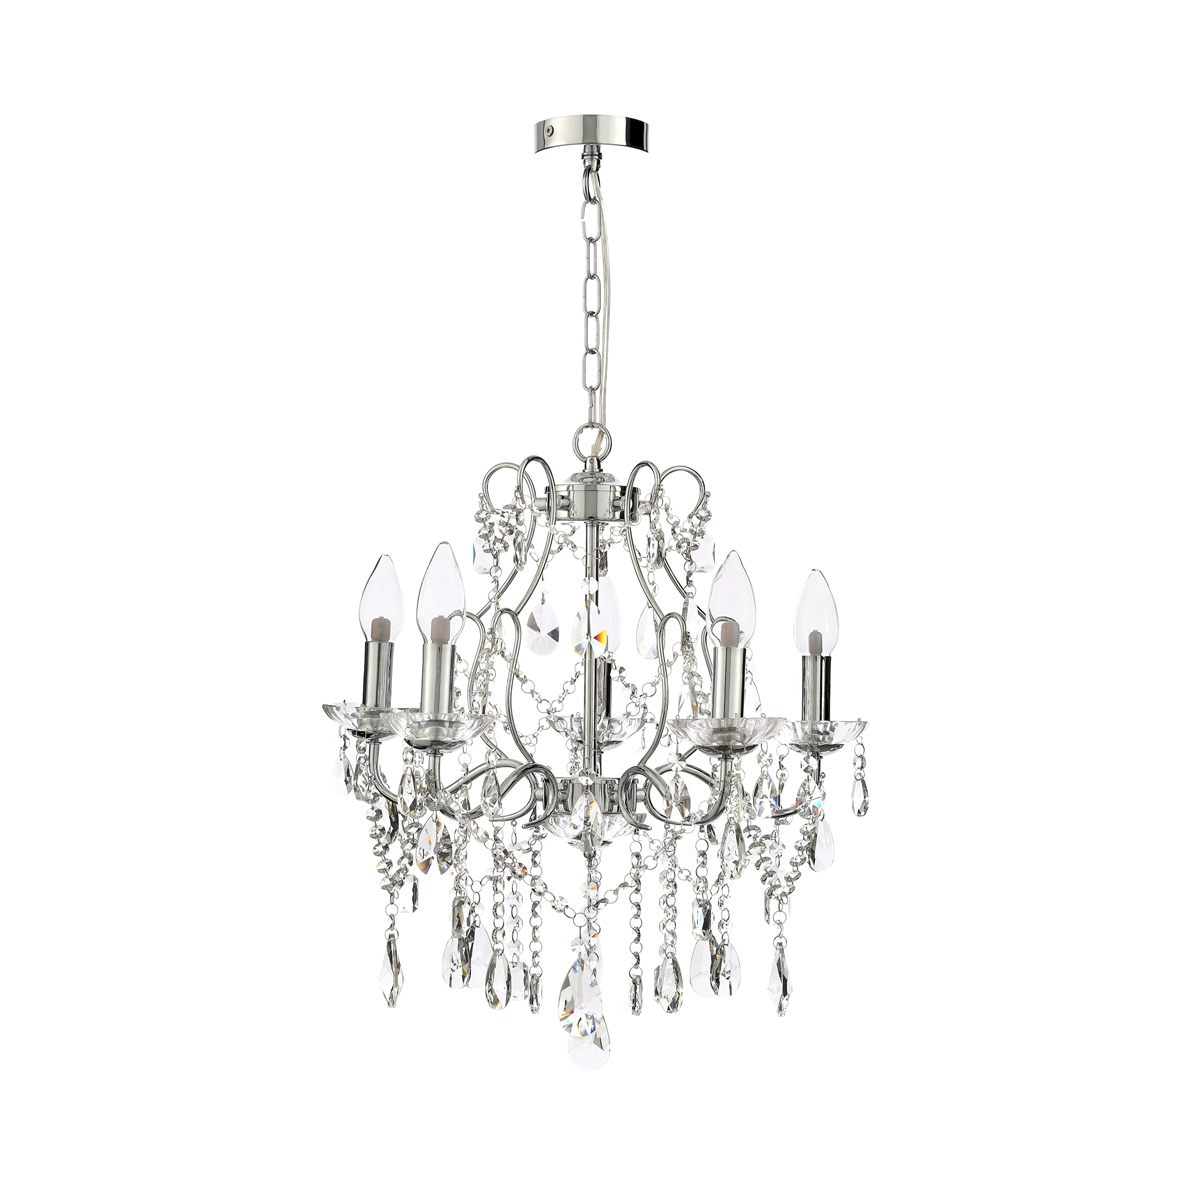 Marquis by Waterford Annalee 5 light bathroom chandelier